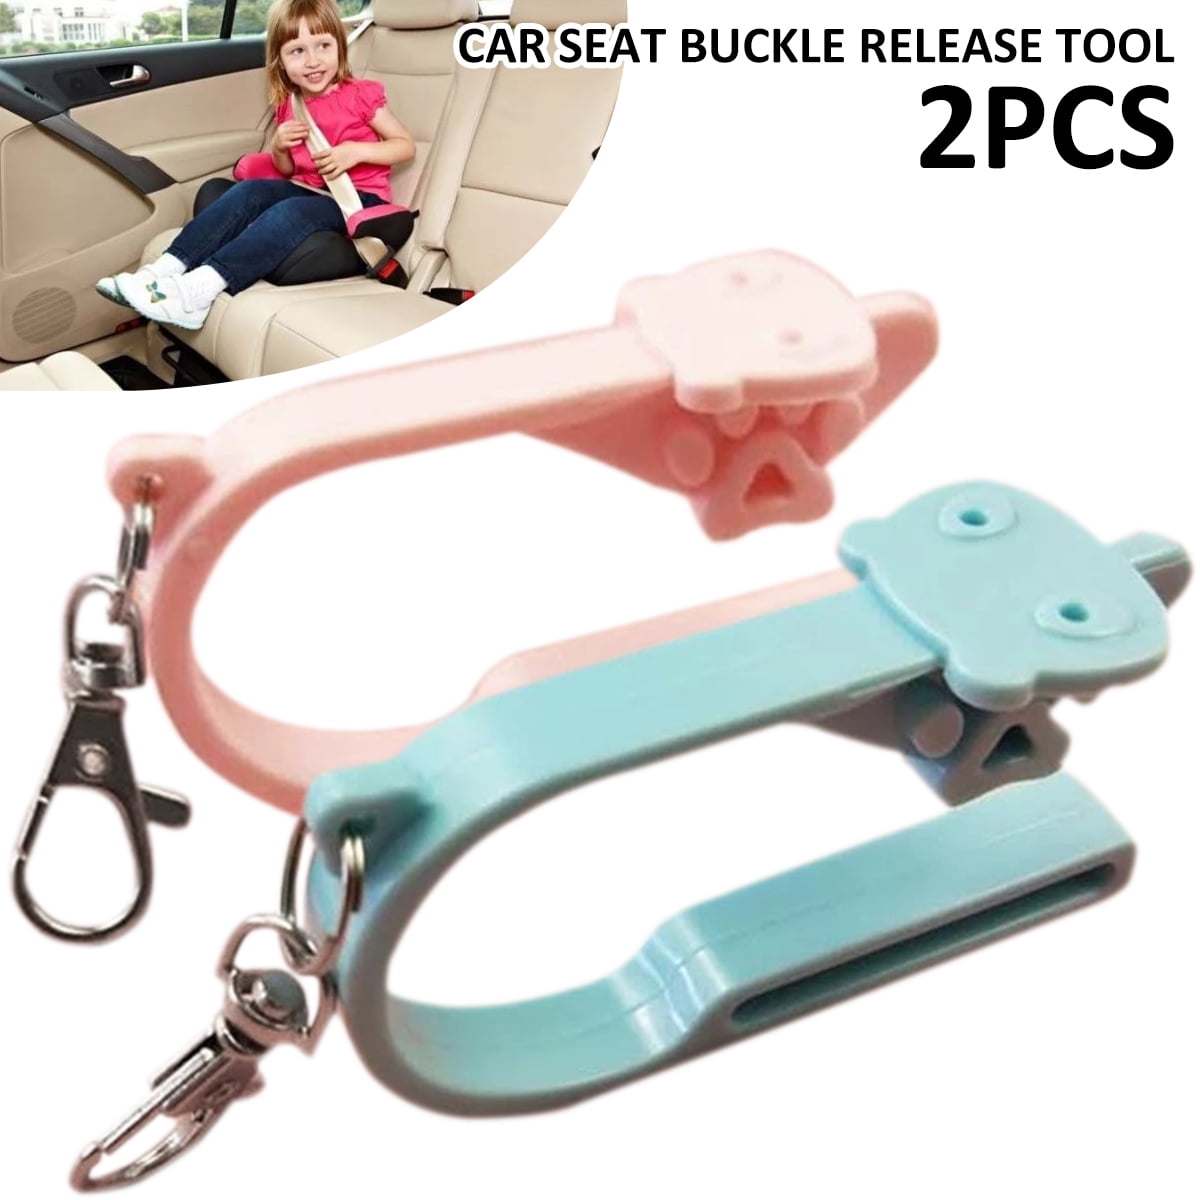 Easy Car Seat Unbuckle,Baby Carseat Unbuckler Helps Kids and Adults to Unbuckle 1 Pcs 2019 New Easy Buckle Tool The Car Seat Key 